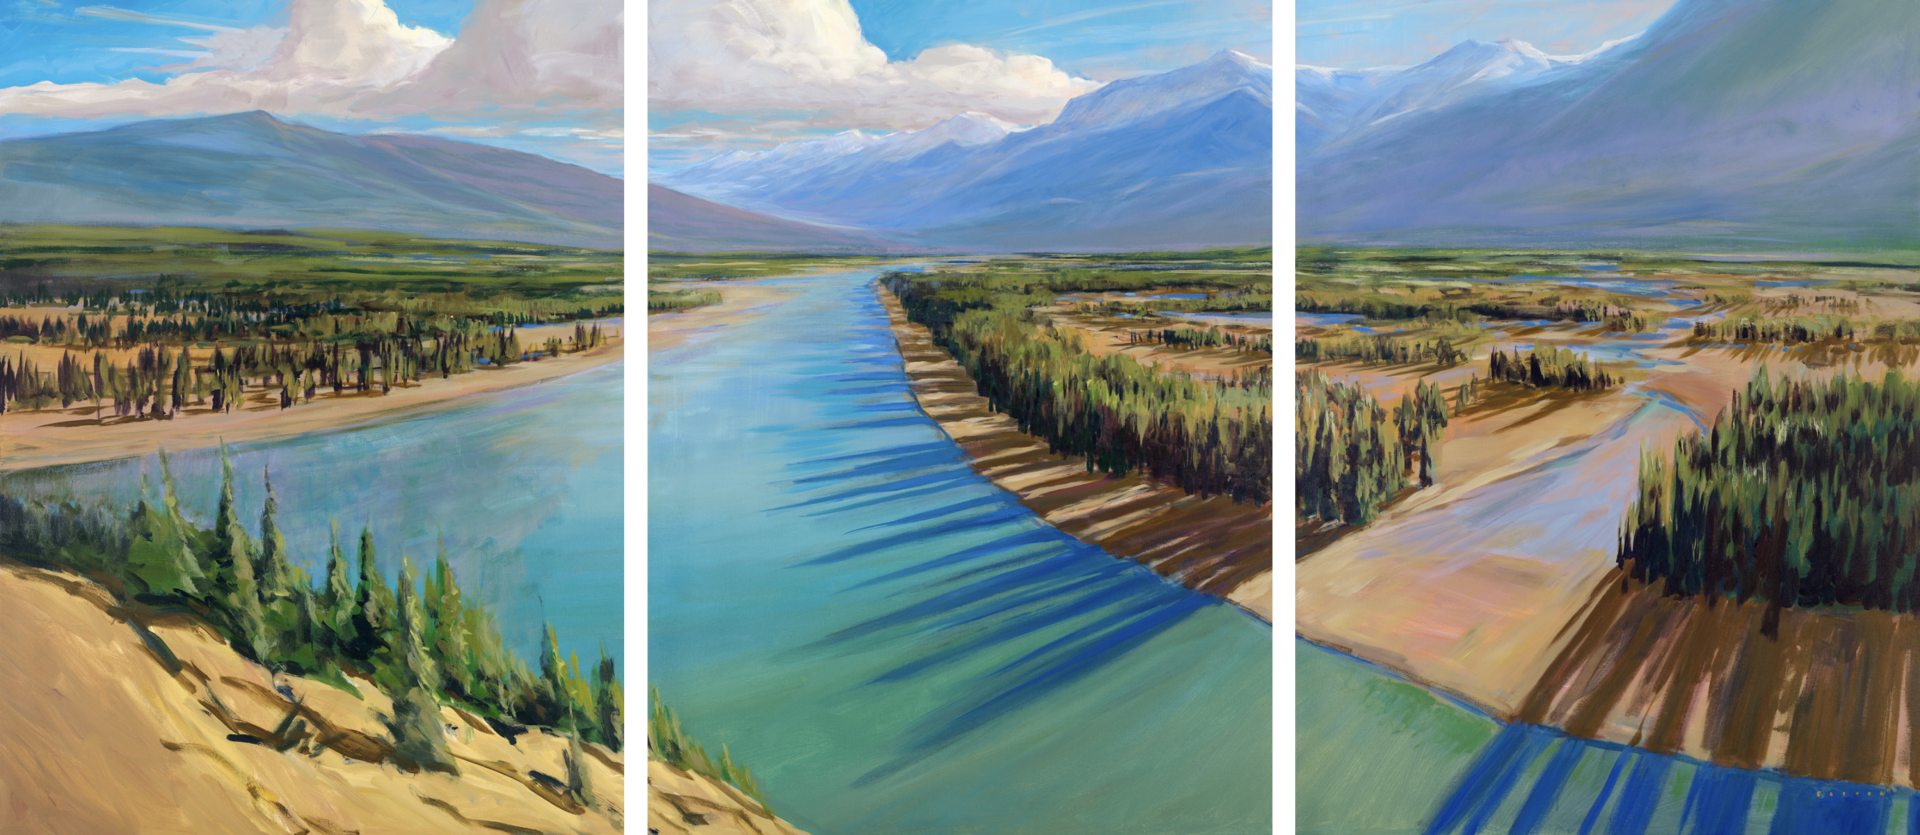 Athabasca Grandeur Triptych by Charlie Easton